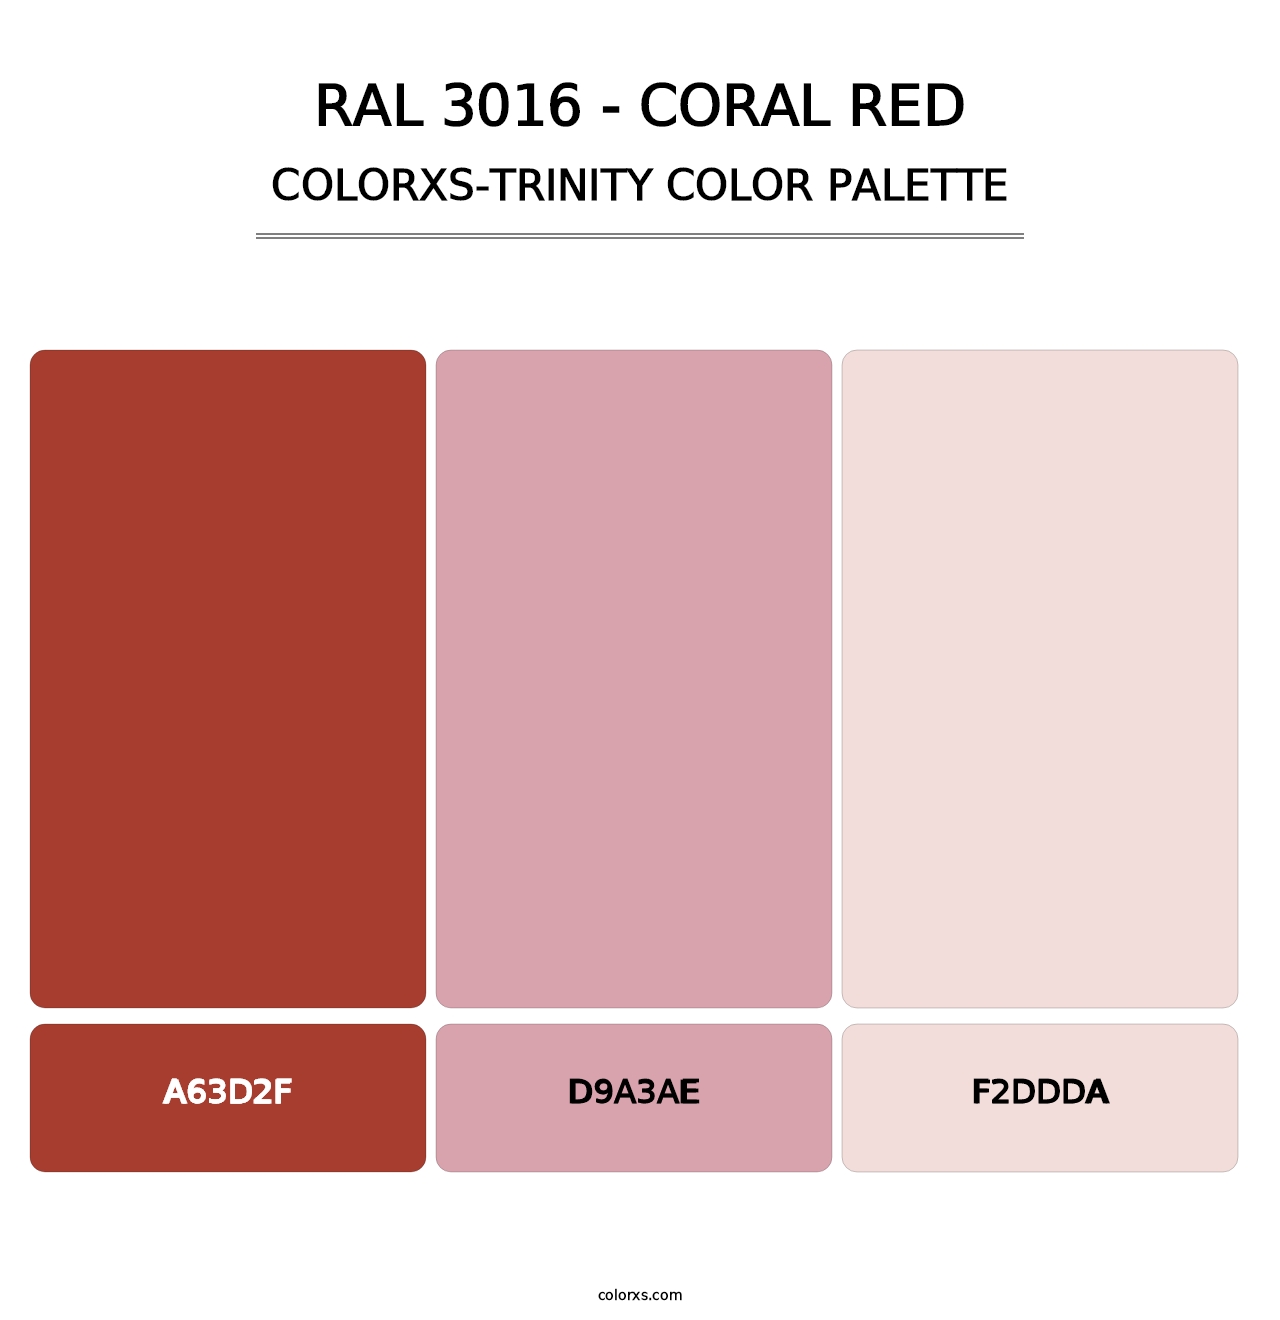 RAL 3016 - Coral Red - Colorxs Trinity Palette